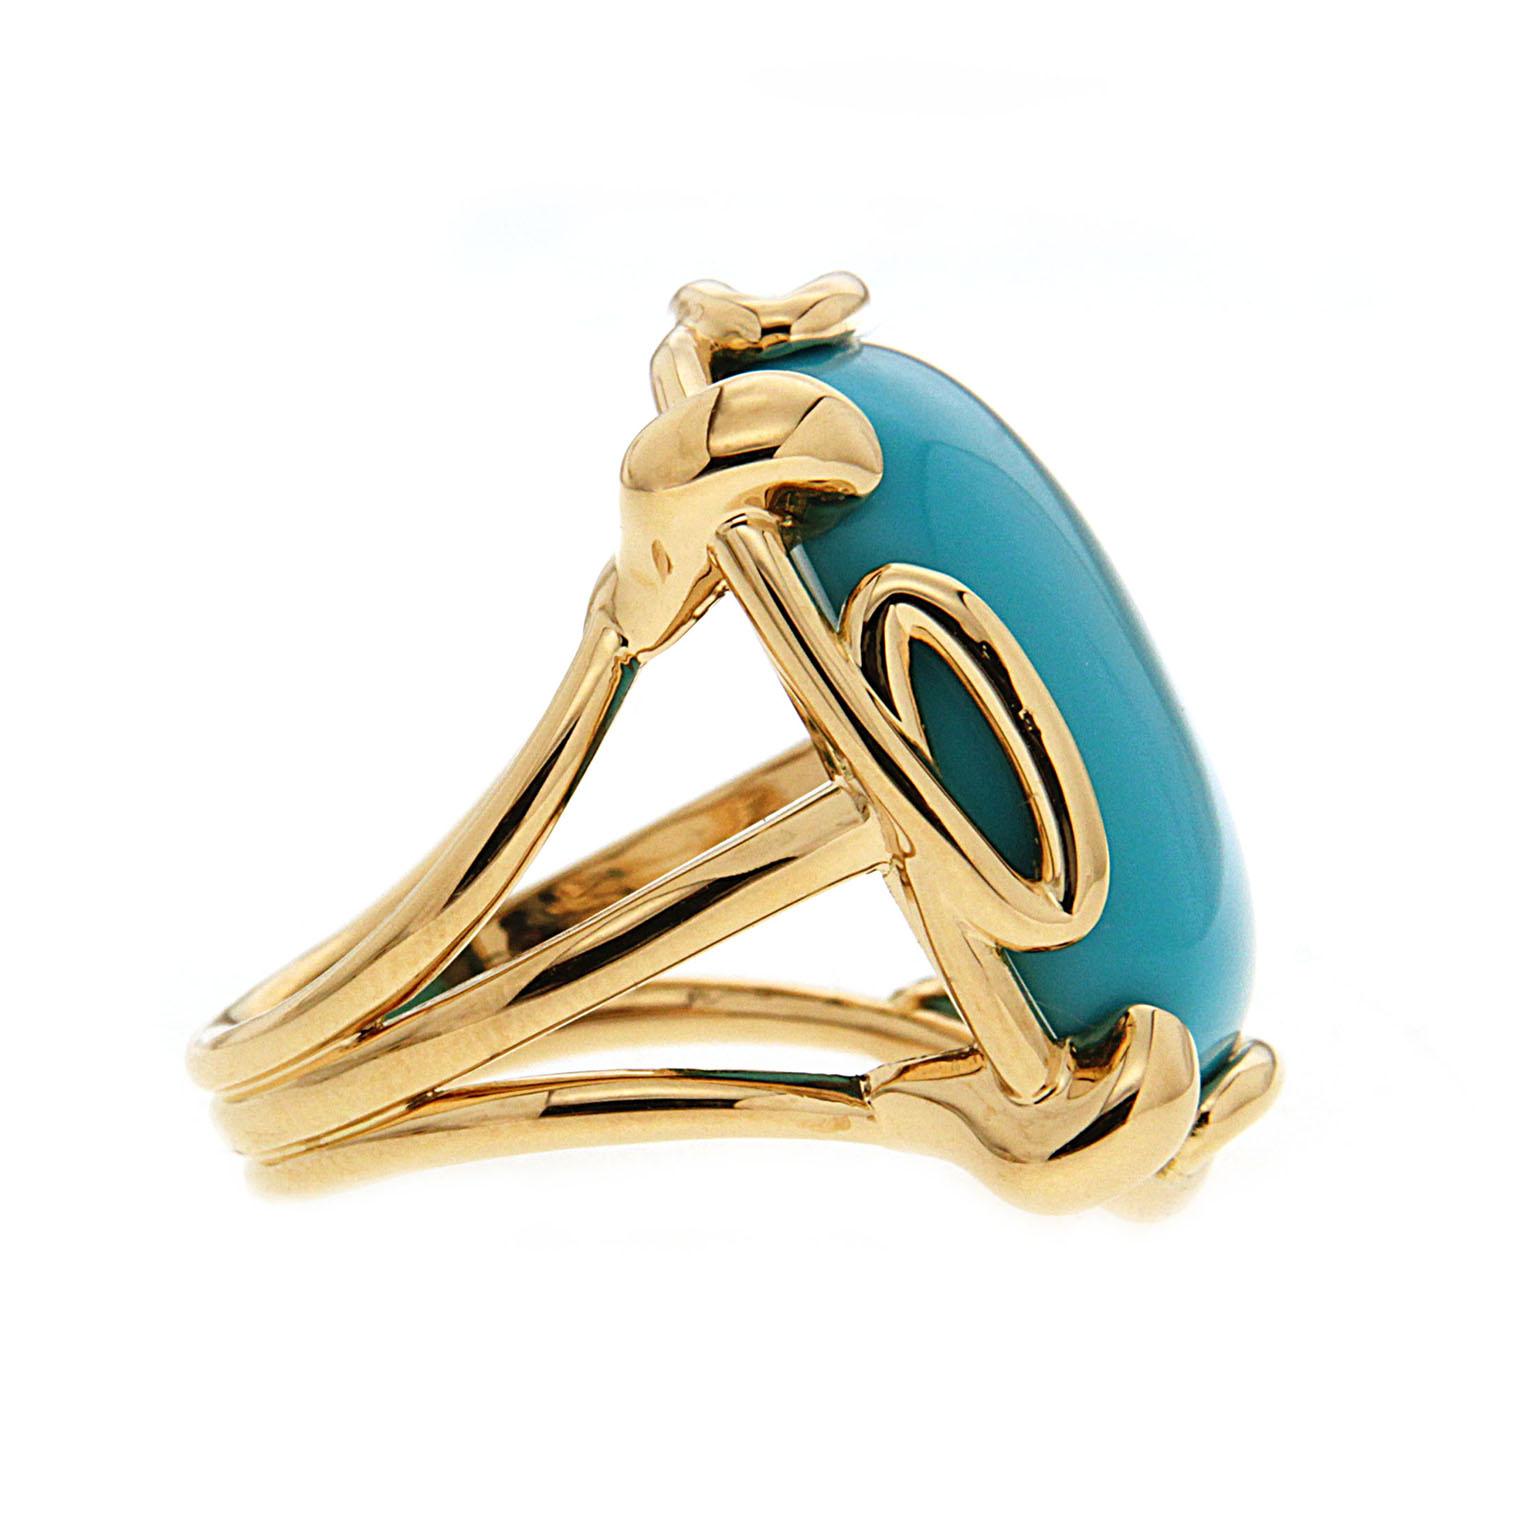 Women's or Men's Valentin Magro Cushion Turquoise Cabochon Ring in Gold